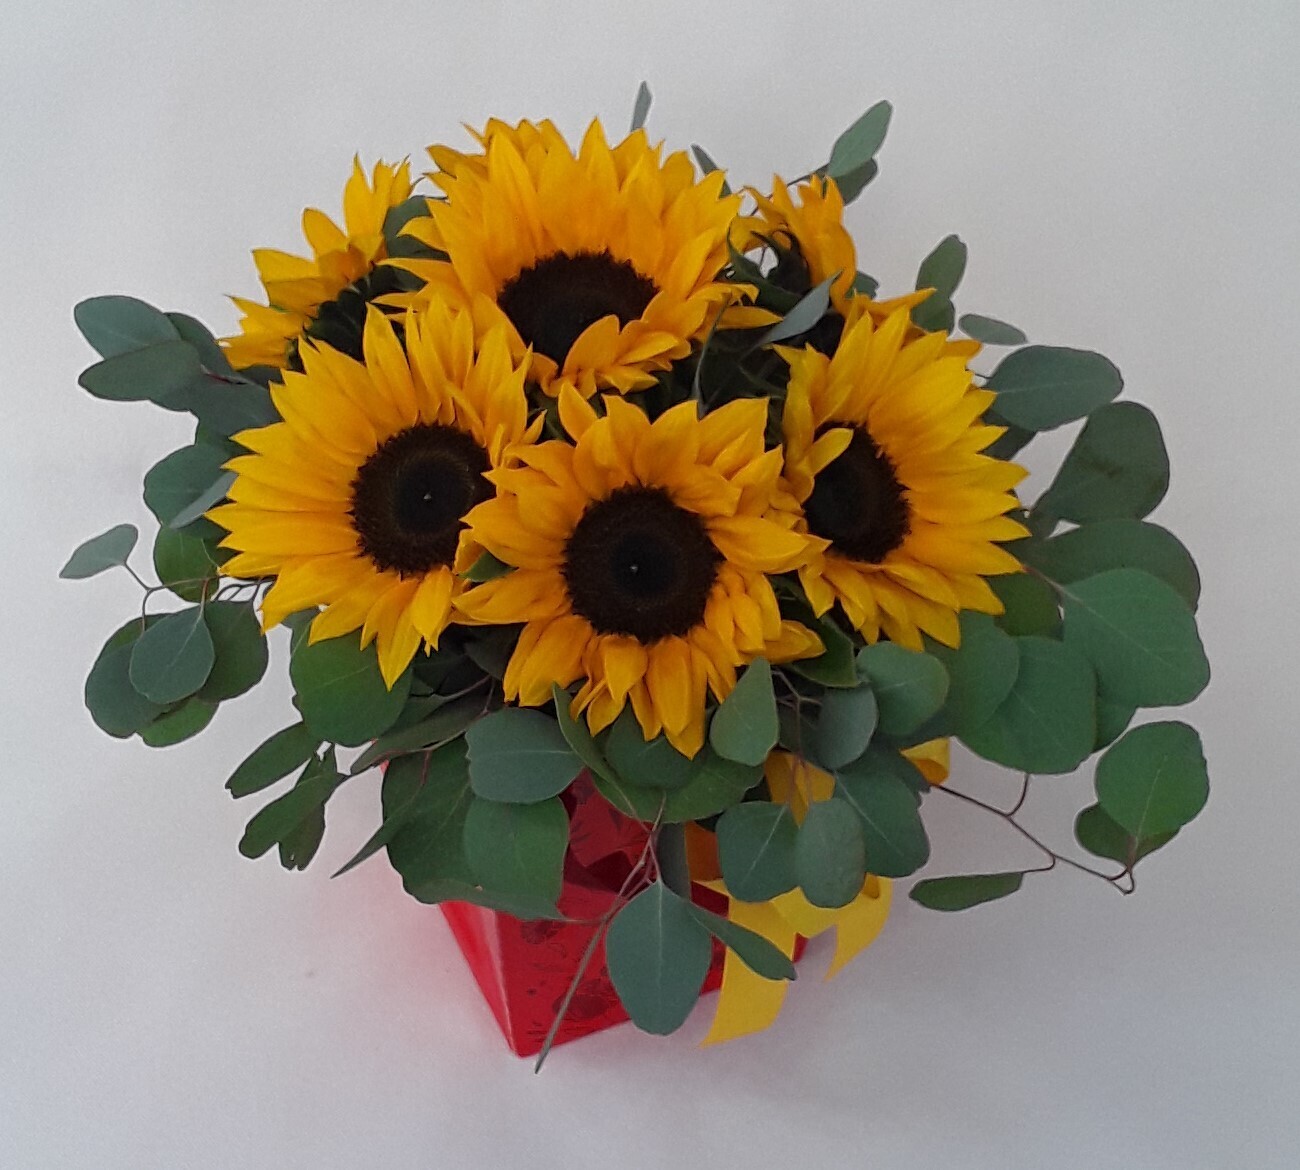 Sunflowers in a box!!!